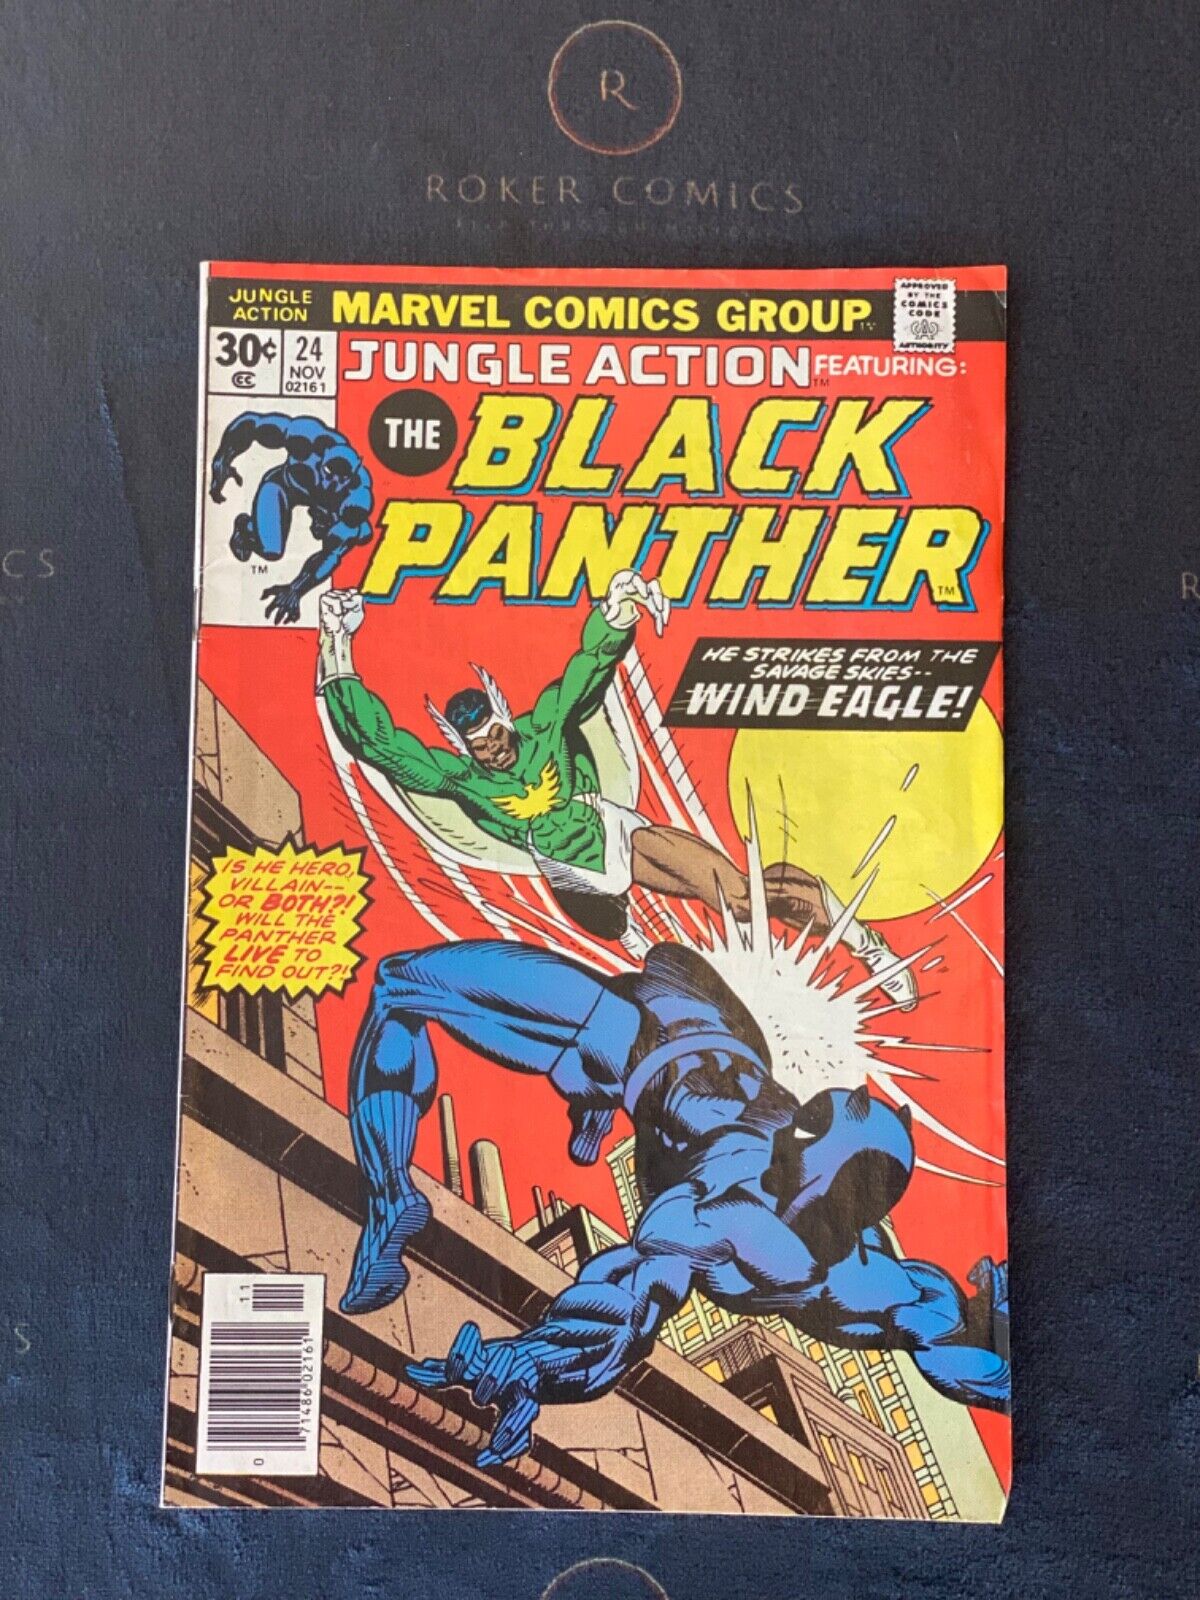 Rare 1976 Jungle Action #24 featuring Black Panther